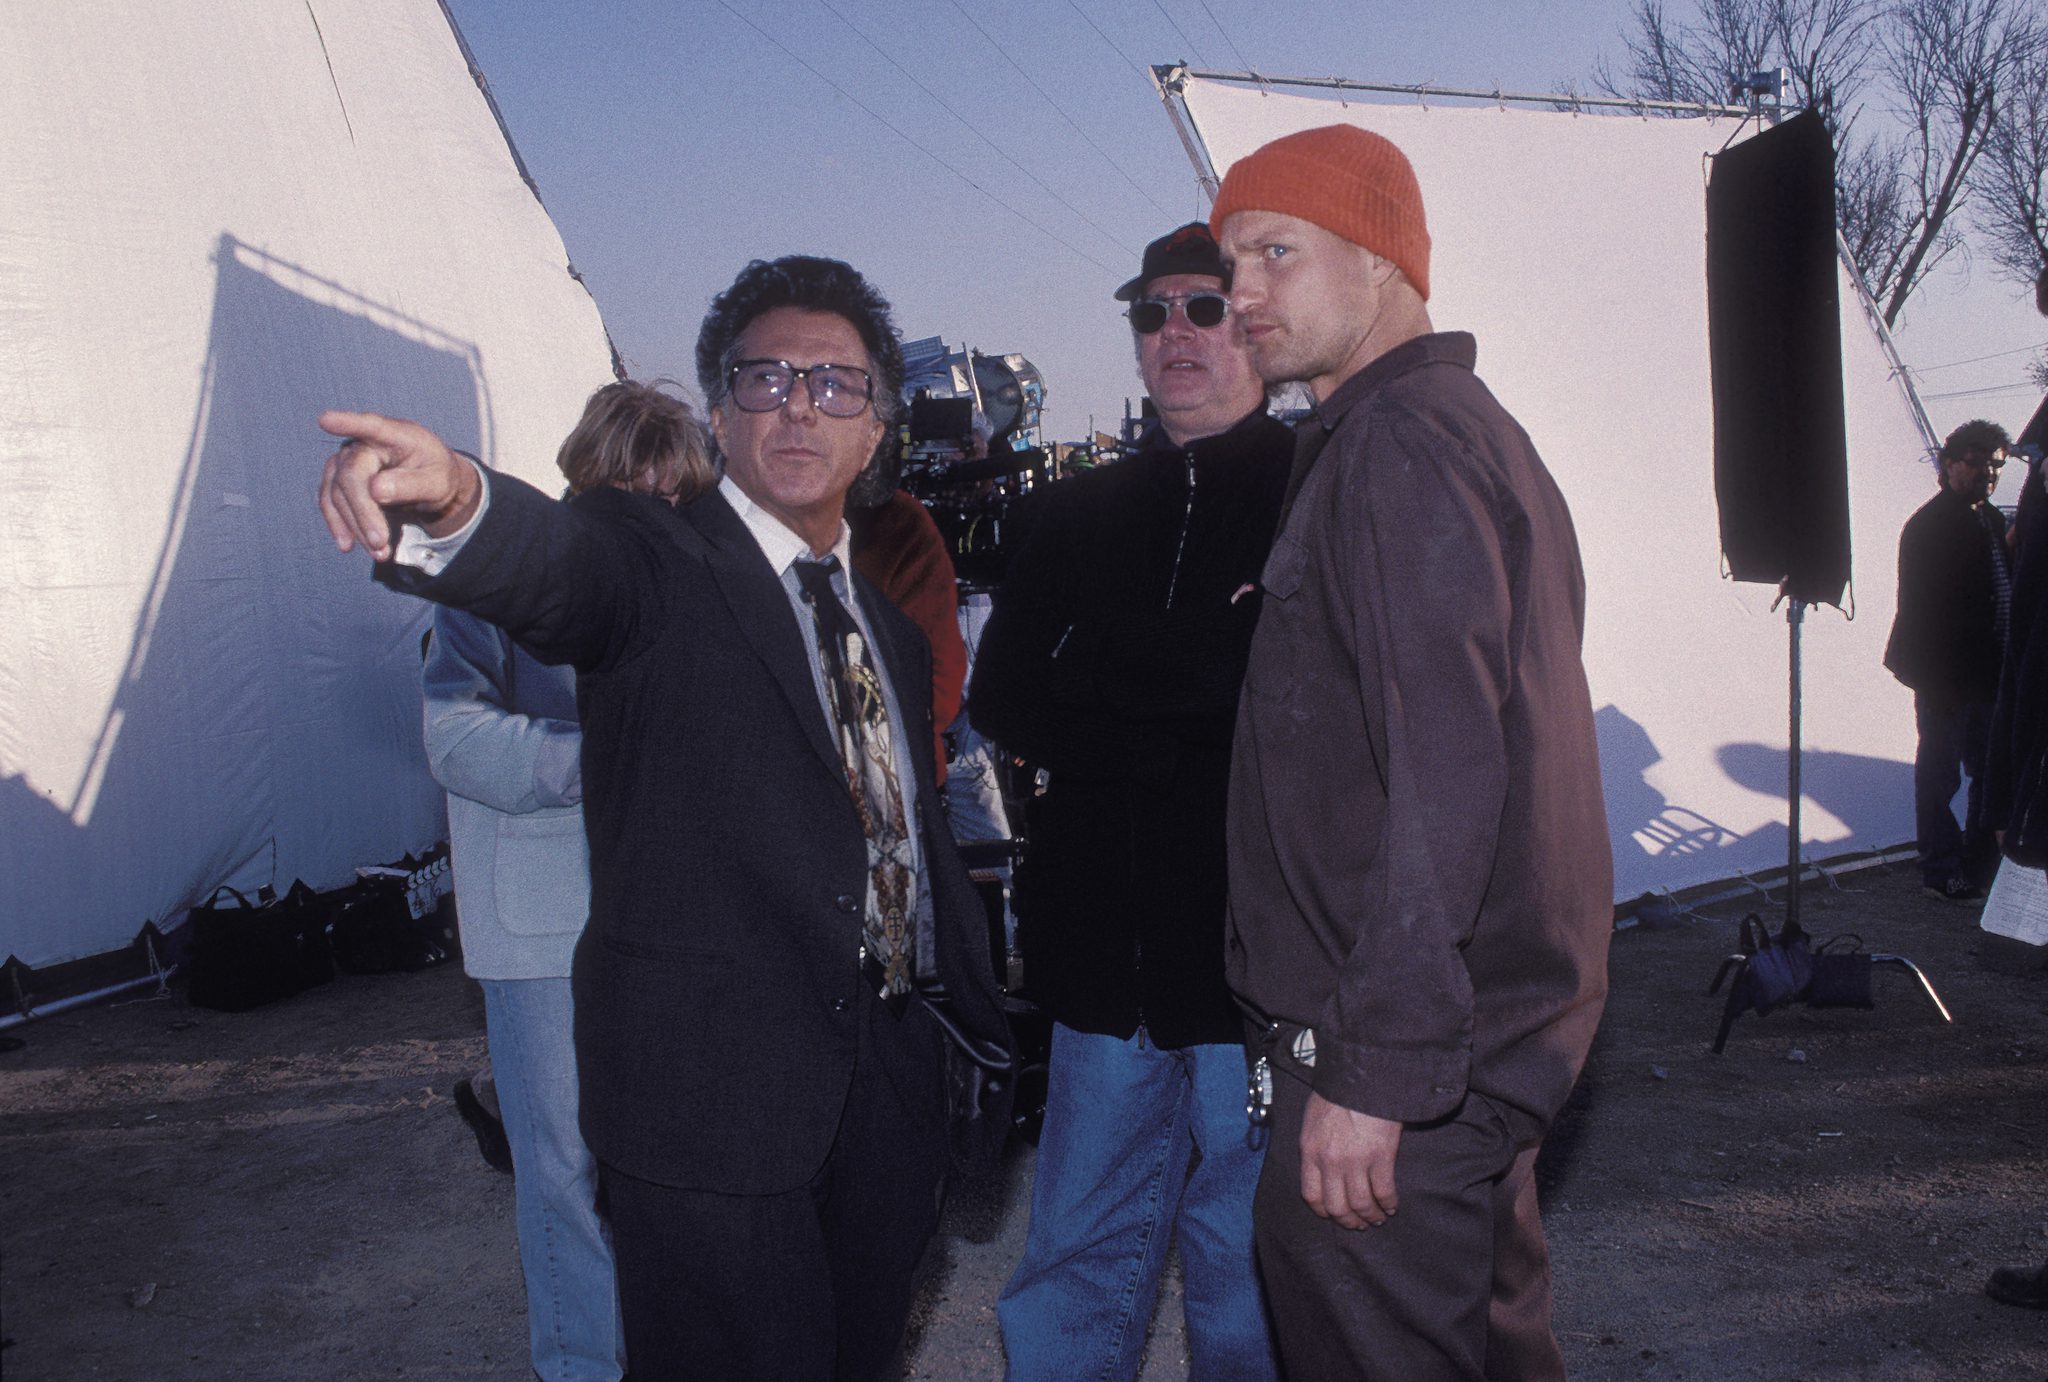 Woody Harrelson on the set of "Wag the Dog"